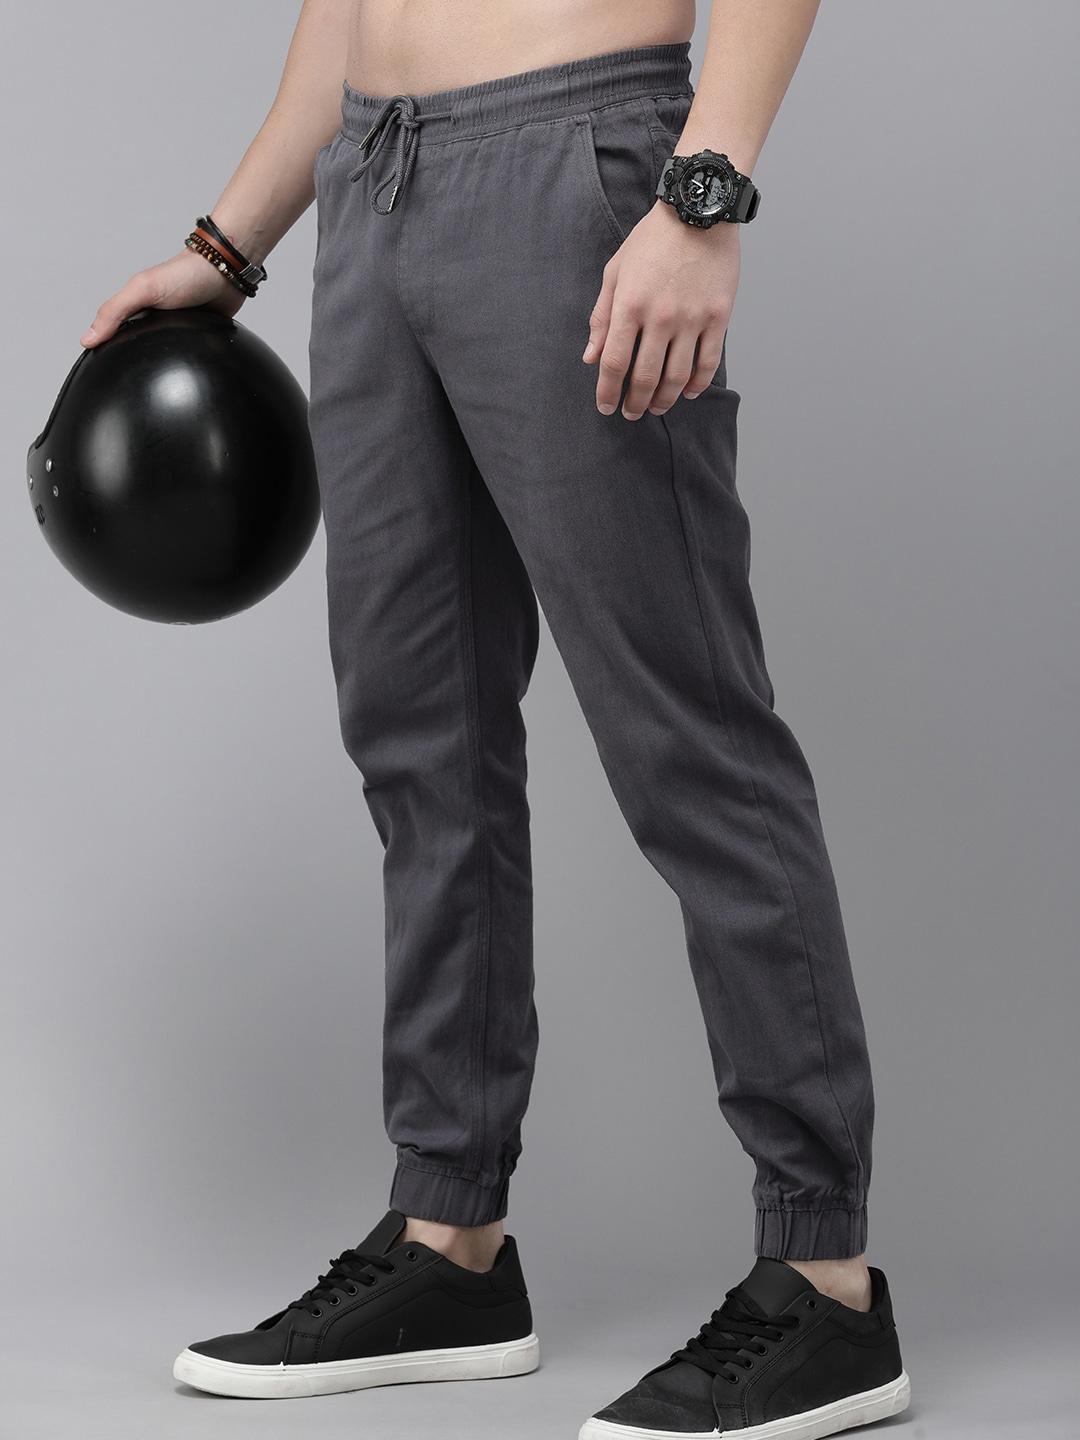 the-roadster-life-co.-men-solid-mid-rise-jogger-trousers